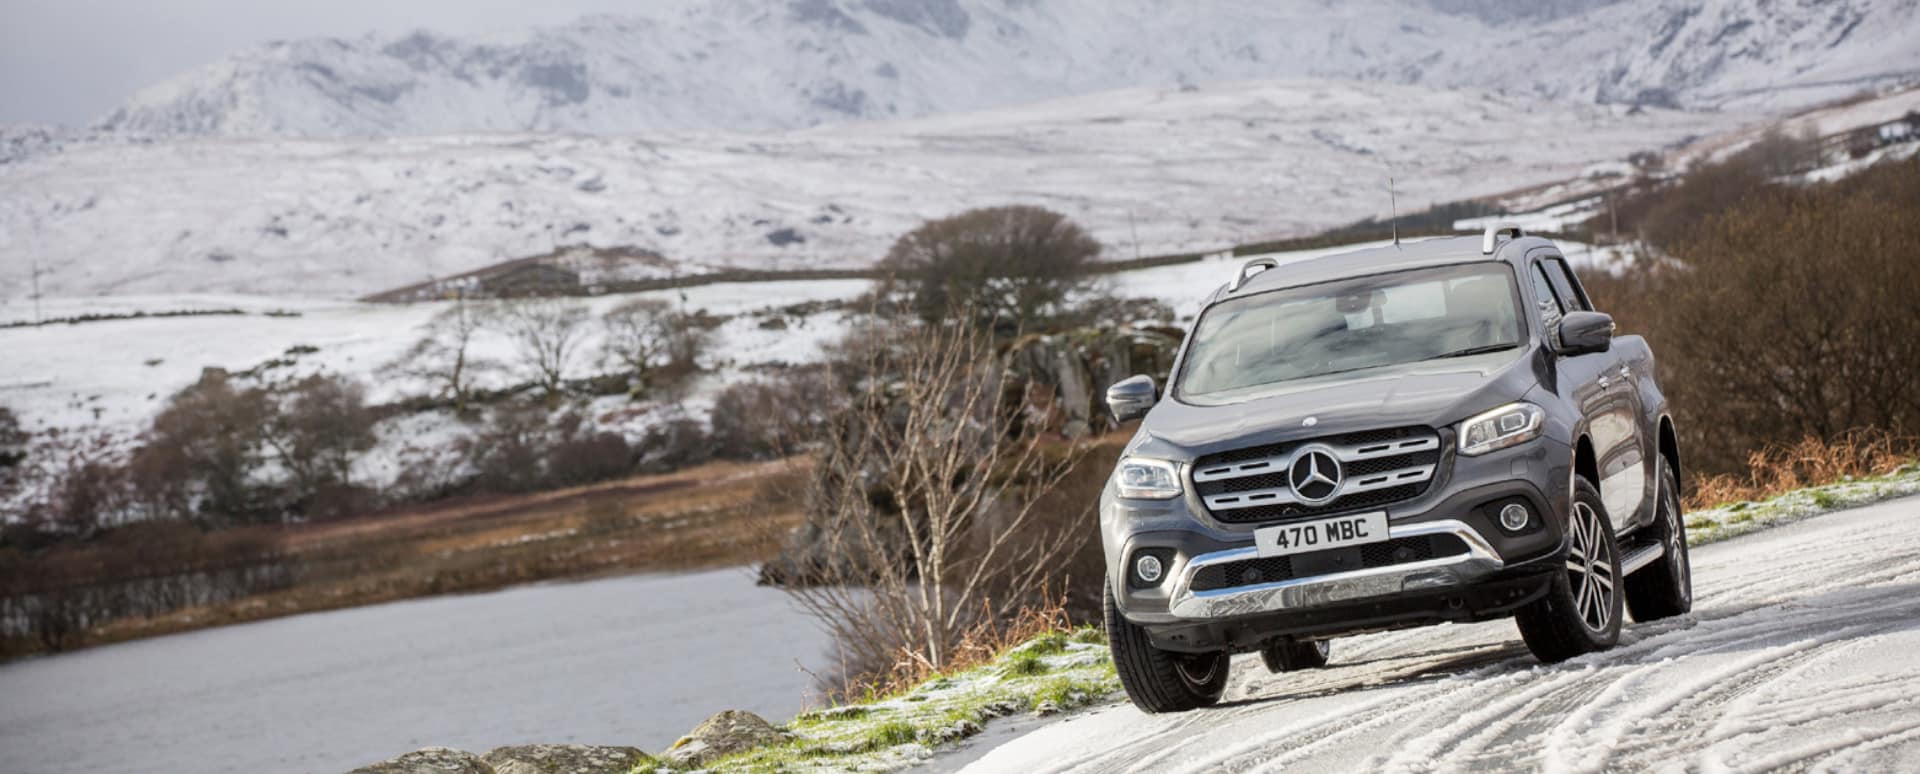 Mercedes-Benz SUV Driving in Snow